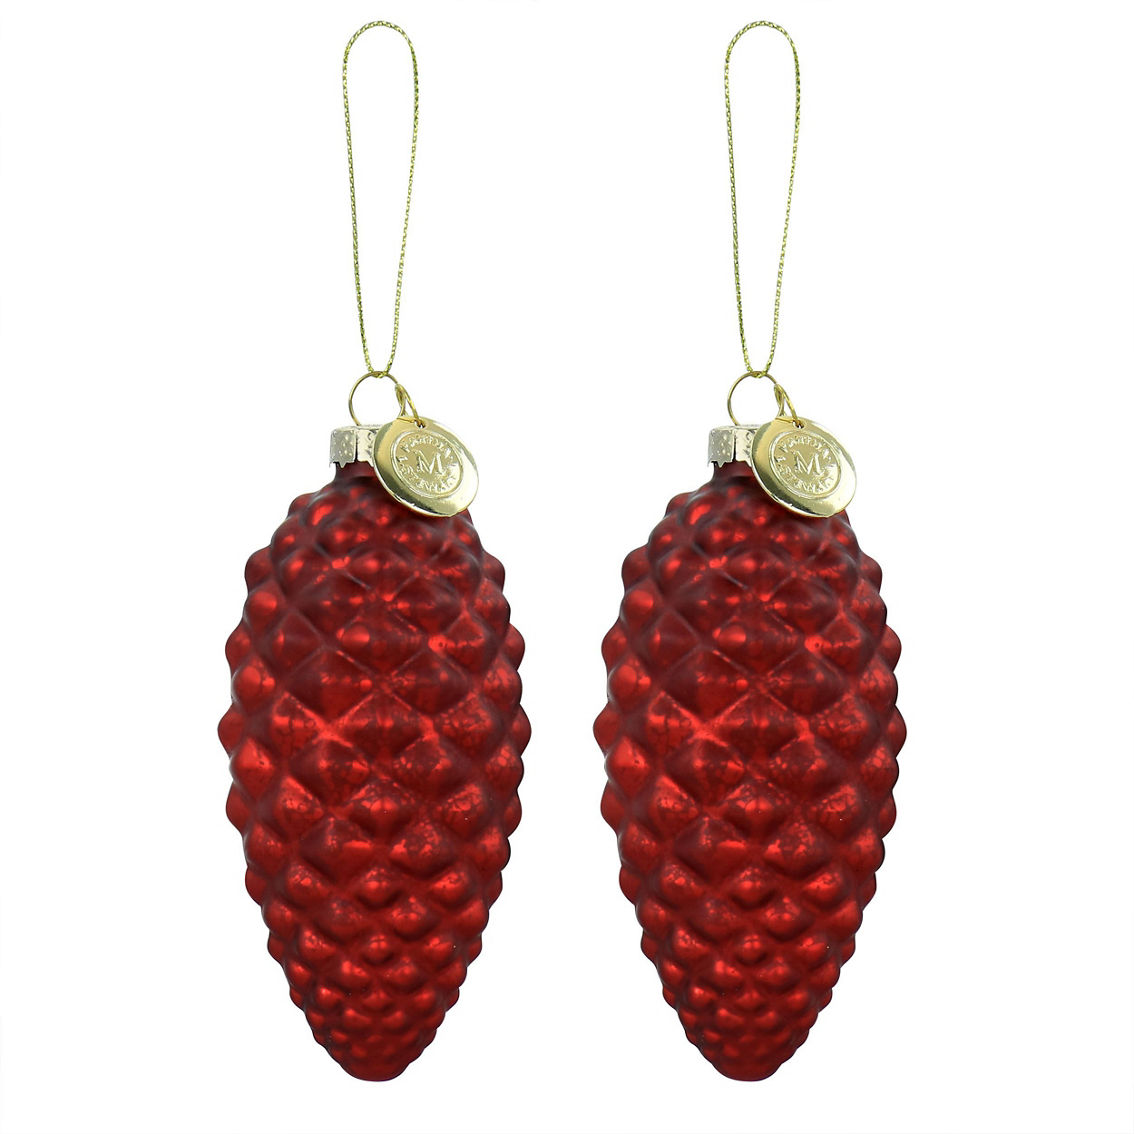 Martha Stewart Holiday Pointy Ball and Pinecone 4 Piece Ornament Set in Red - Image 3 of 5